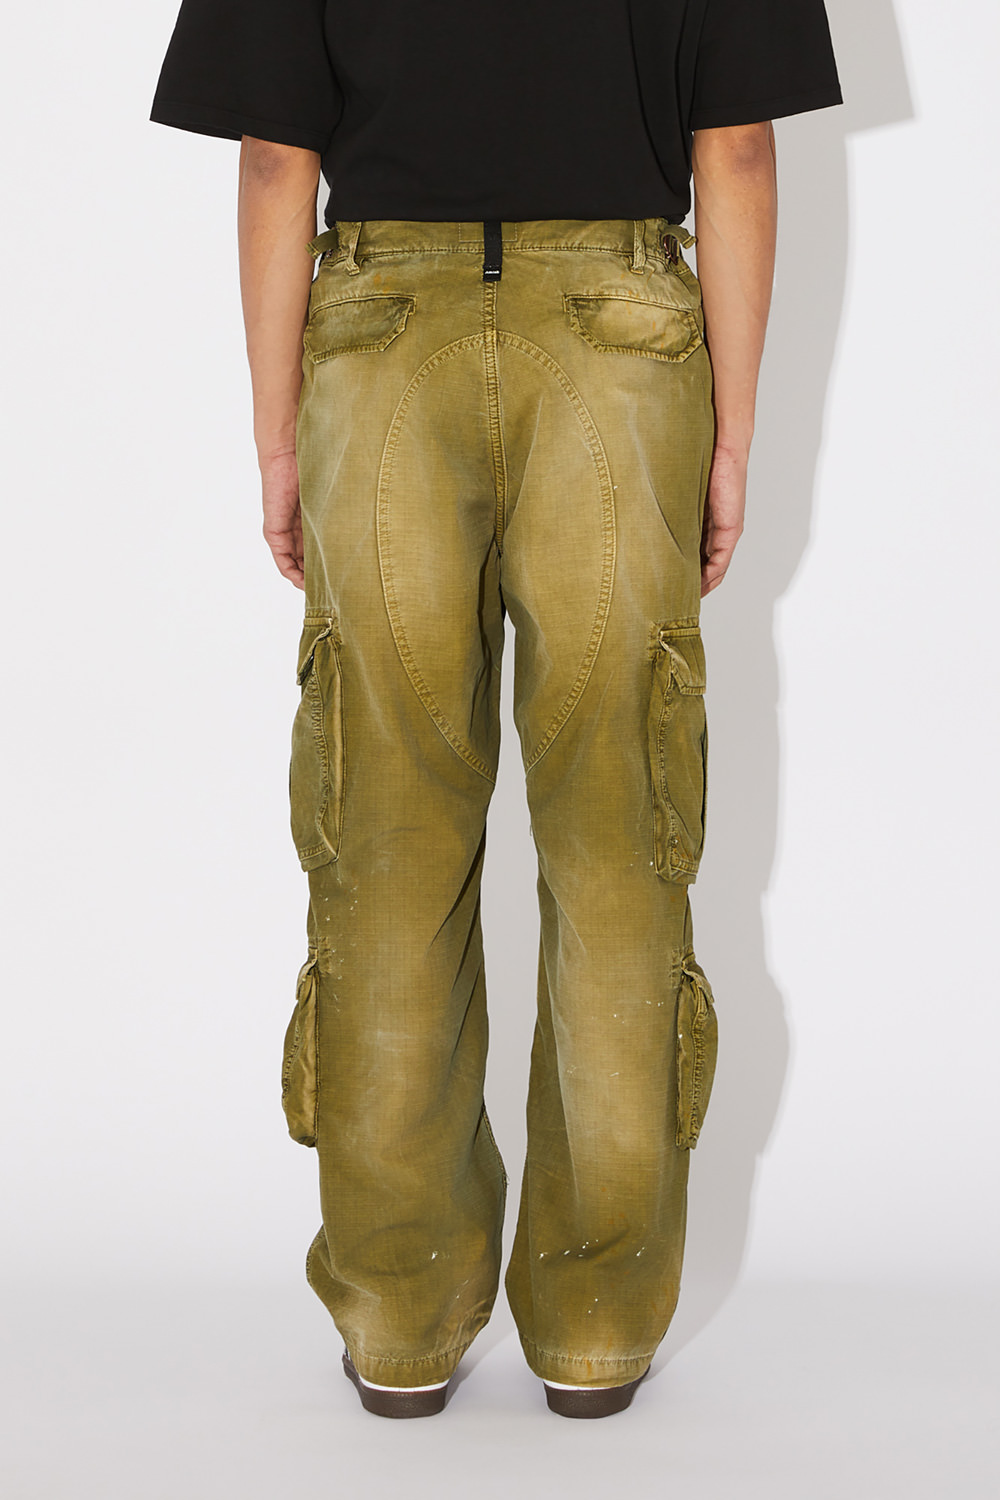 AMISH: DOUBLE RIPSTOP CARGO PANTS